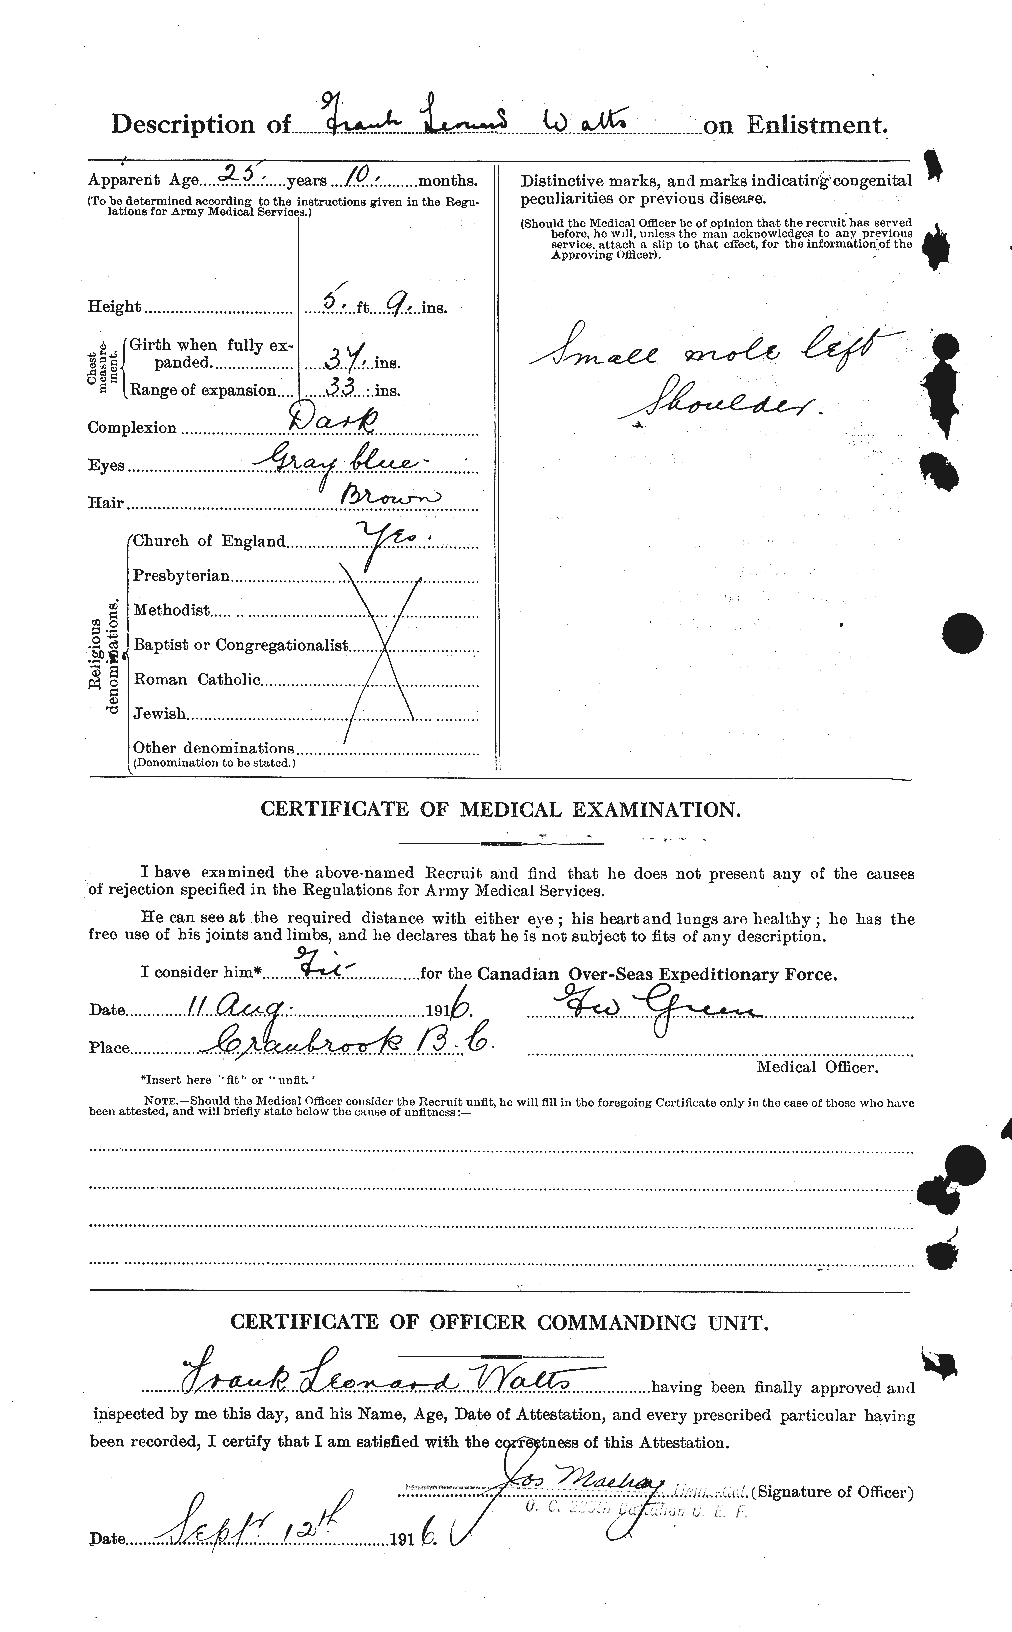 Personnel Records of the First World War - CEF 662760b